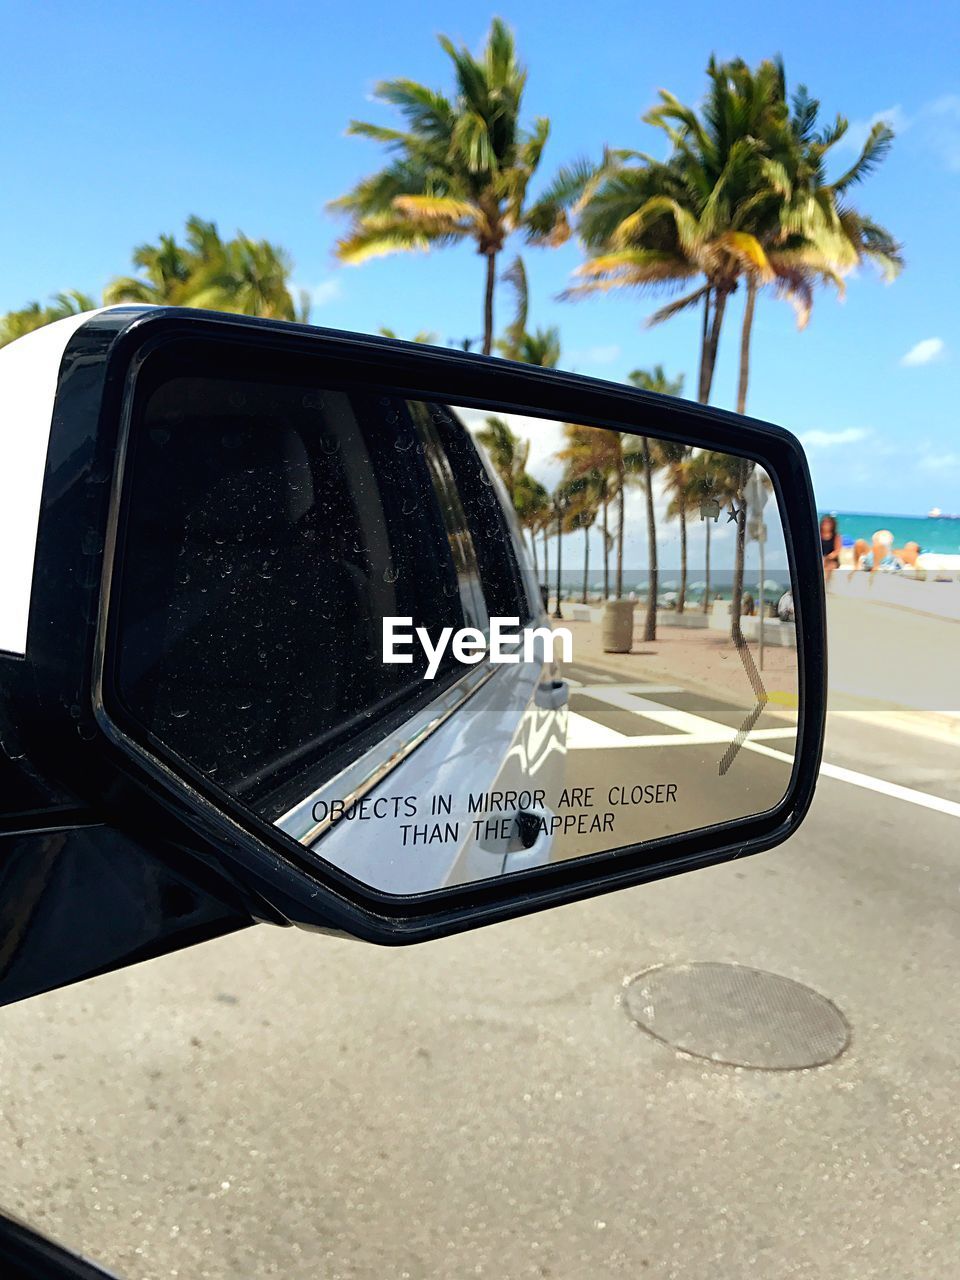 Reflection of palm trees on side-view mirror